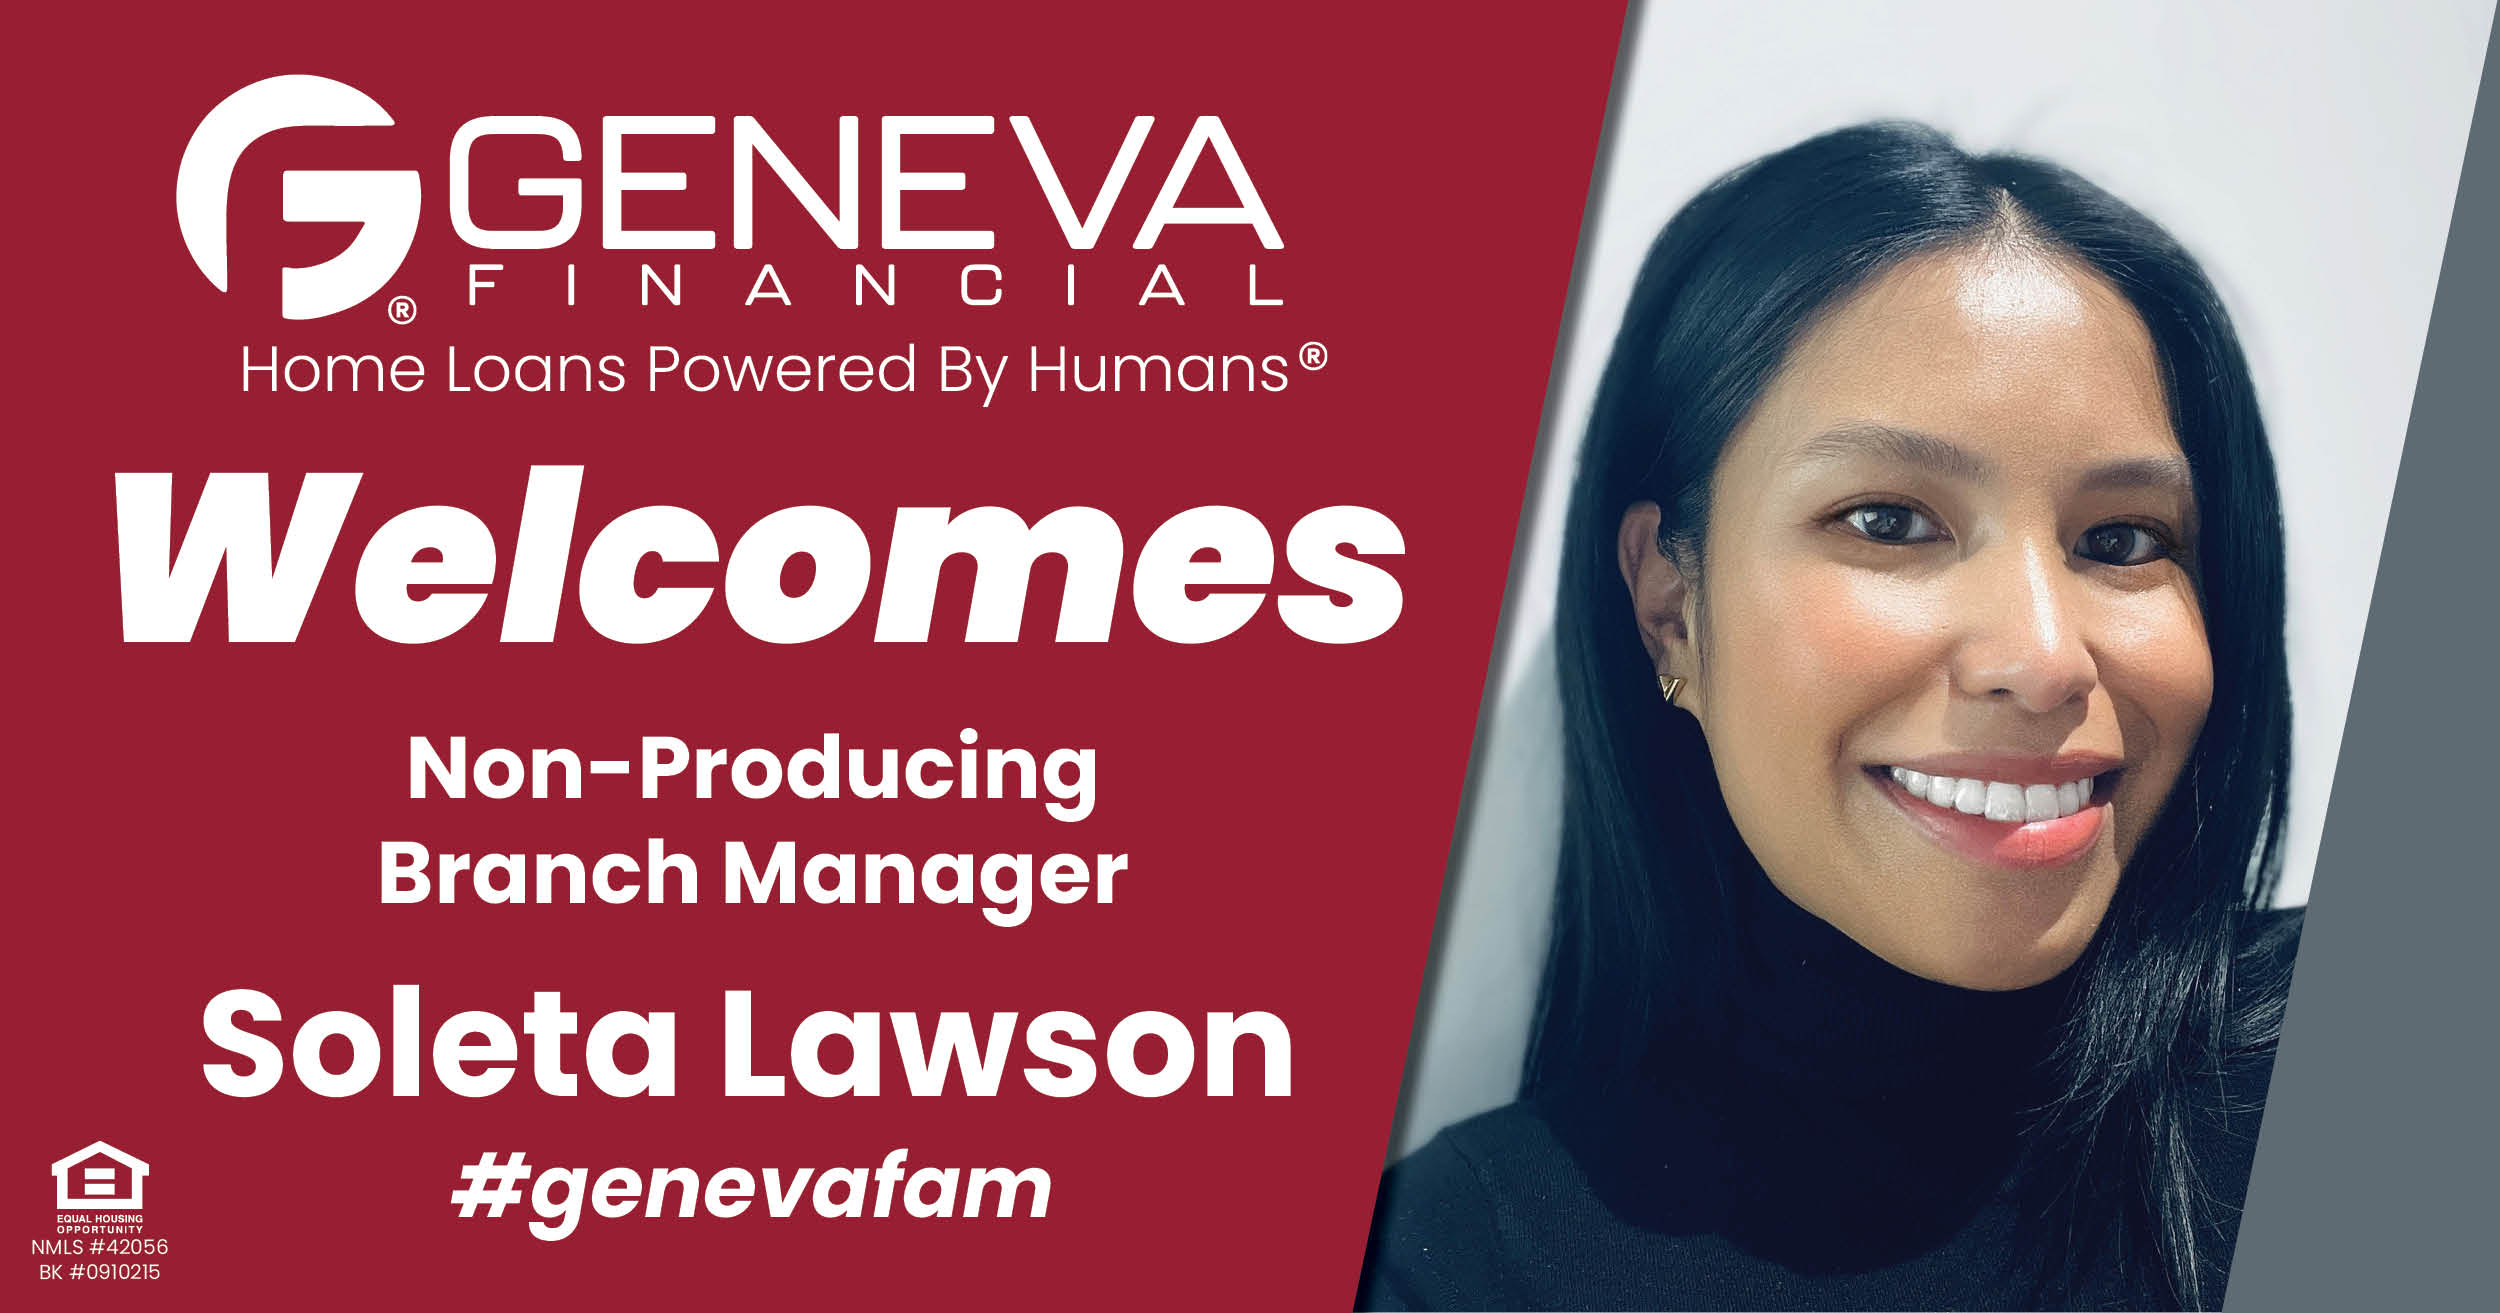 Geneva Financial Welcomes New Non-Producing Branch Manager Soleta Lawson to Columbus, Ohio – Home Loans Powered by Humans®.